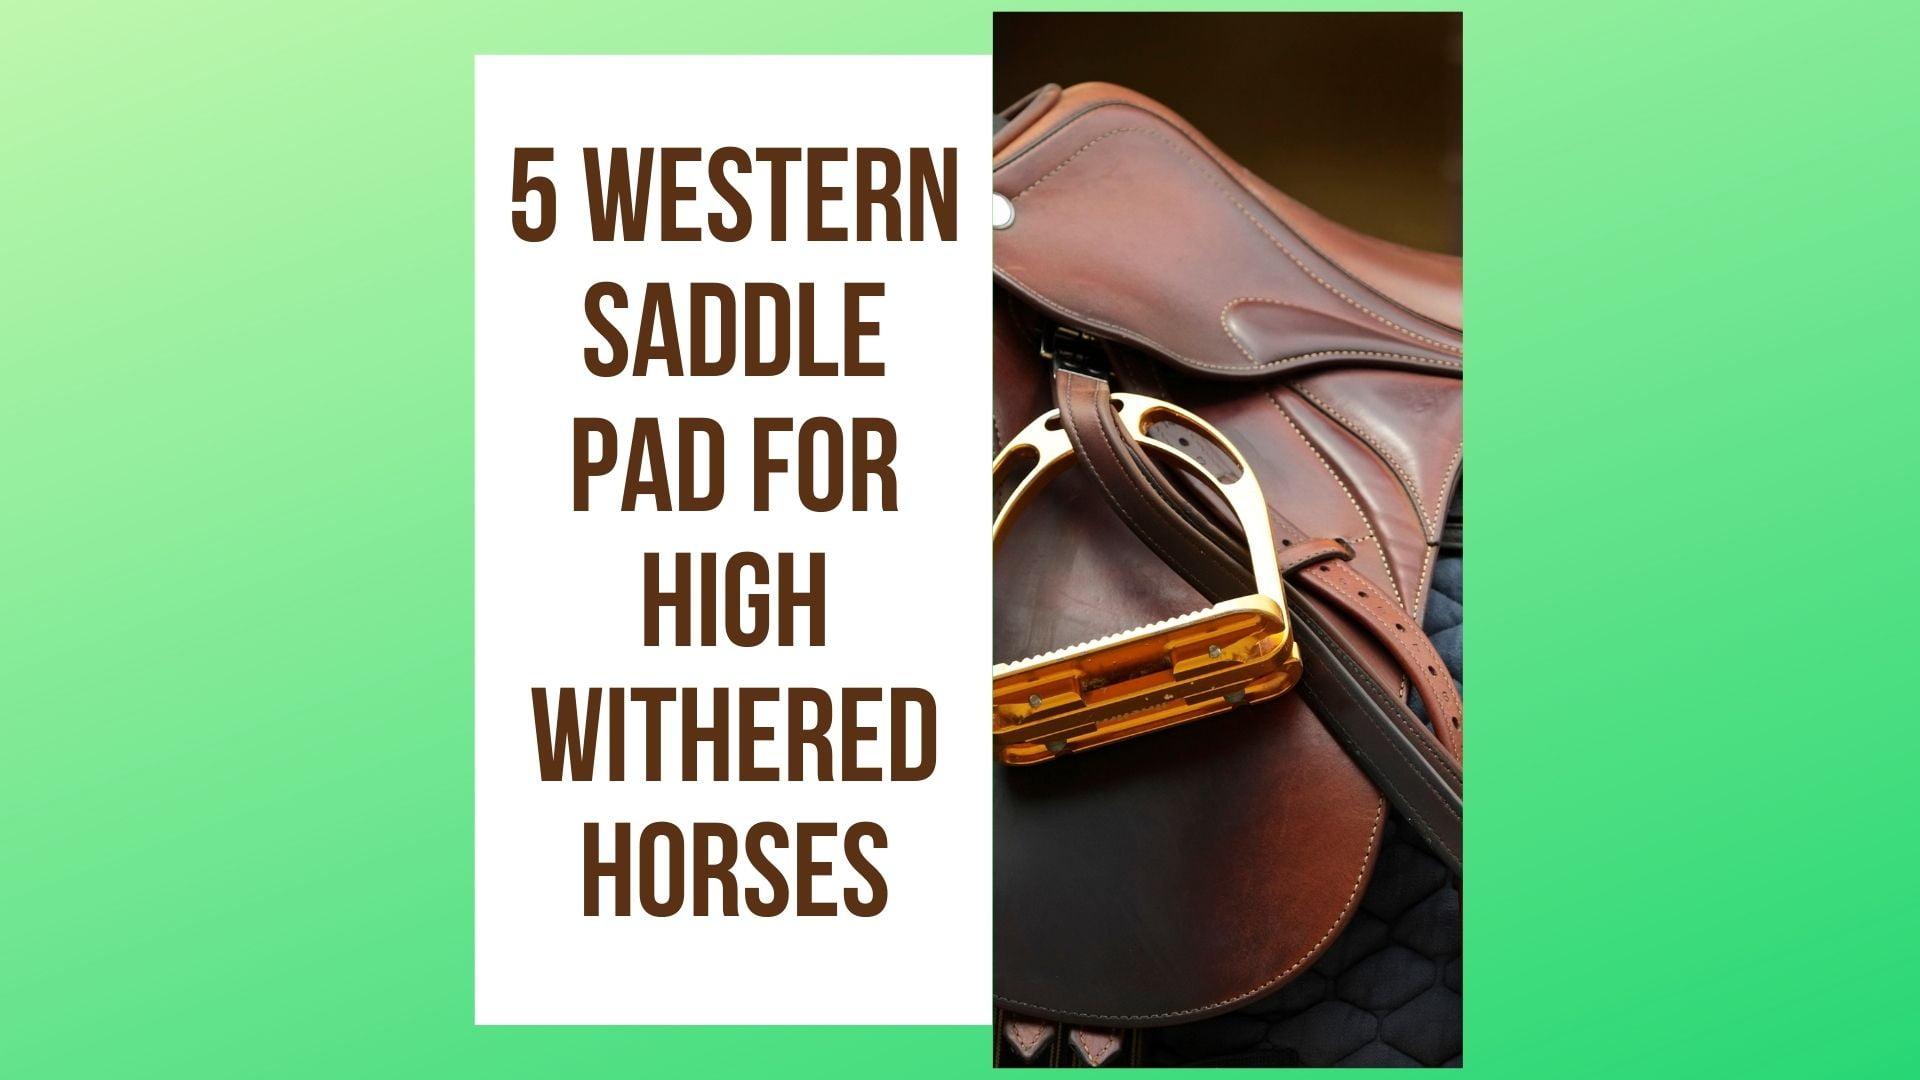 Western Saddle Pad for High Withered Horses